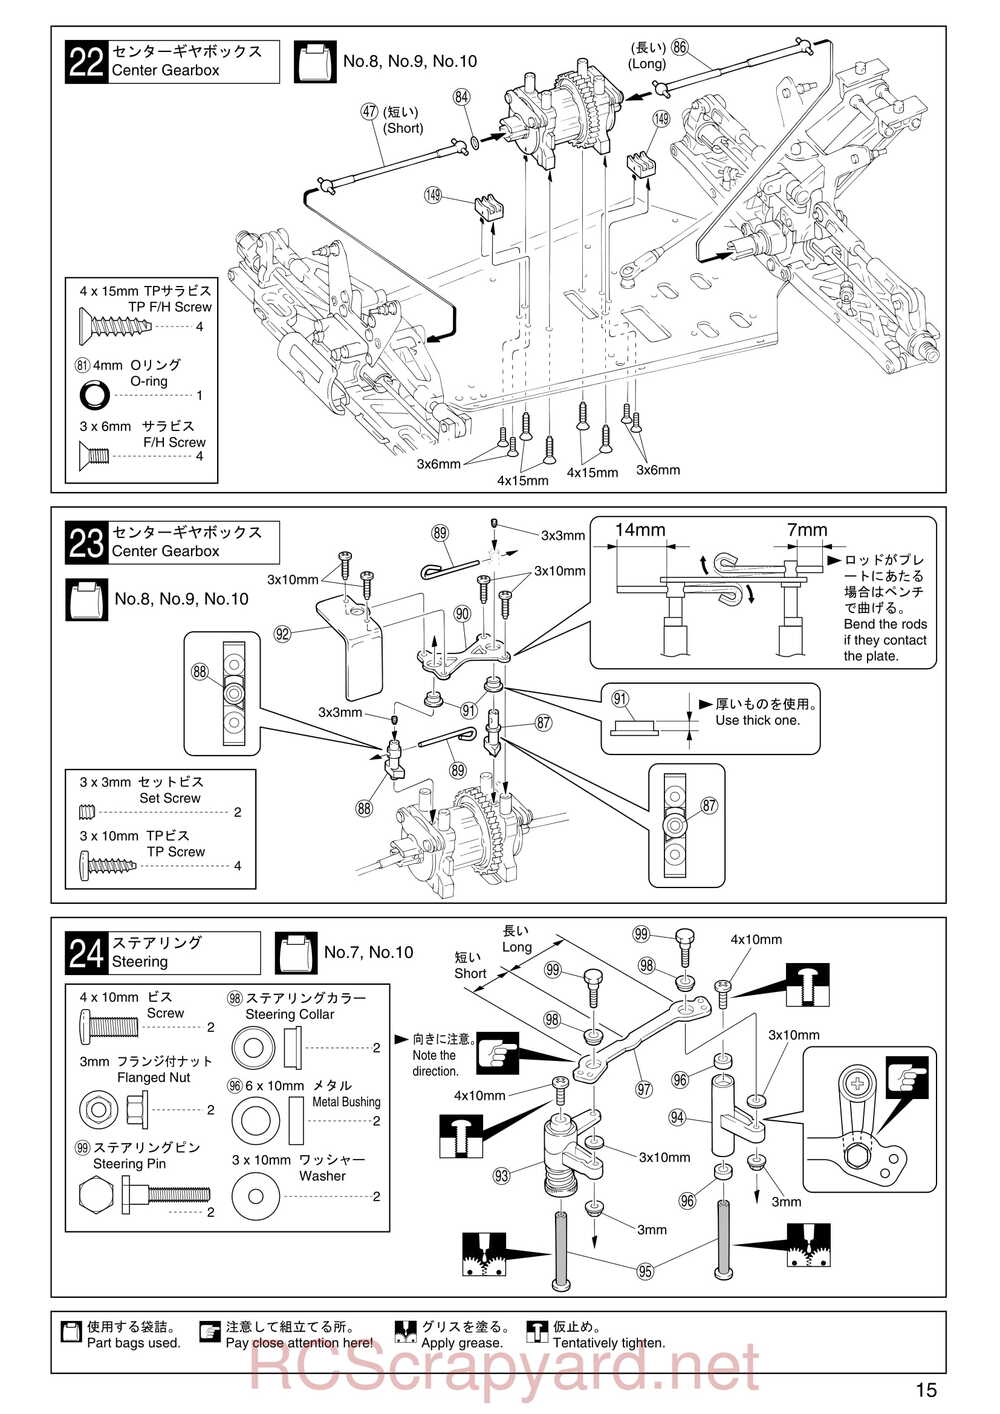 Kyosho - 31081- Inferno-MP-7-5 - Manual - Page 15